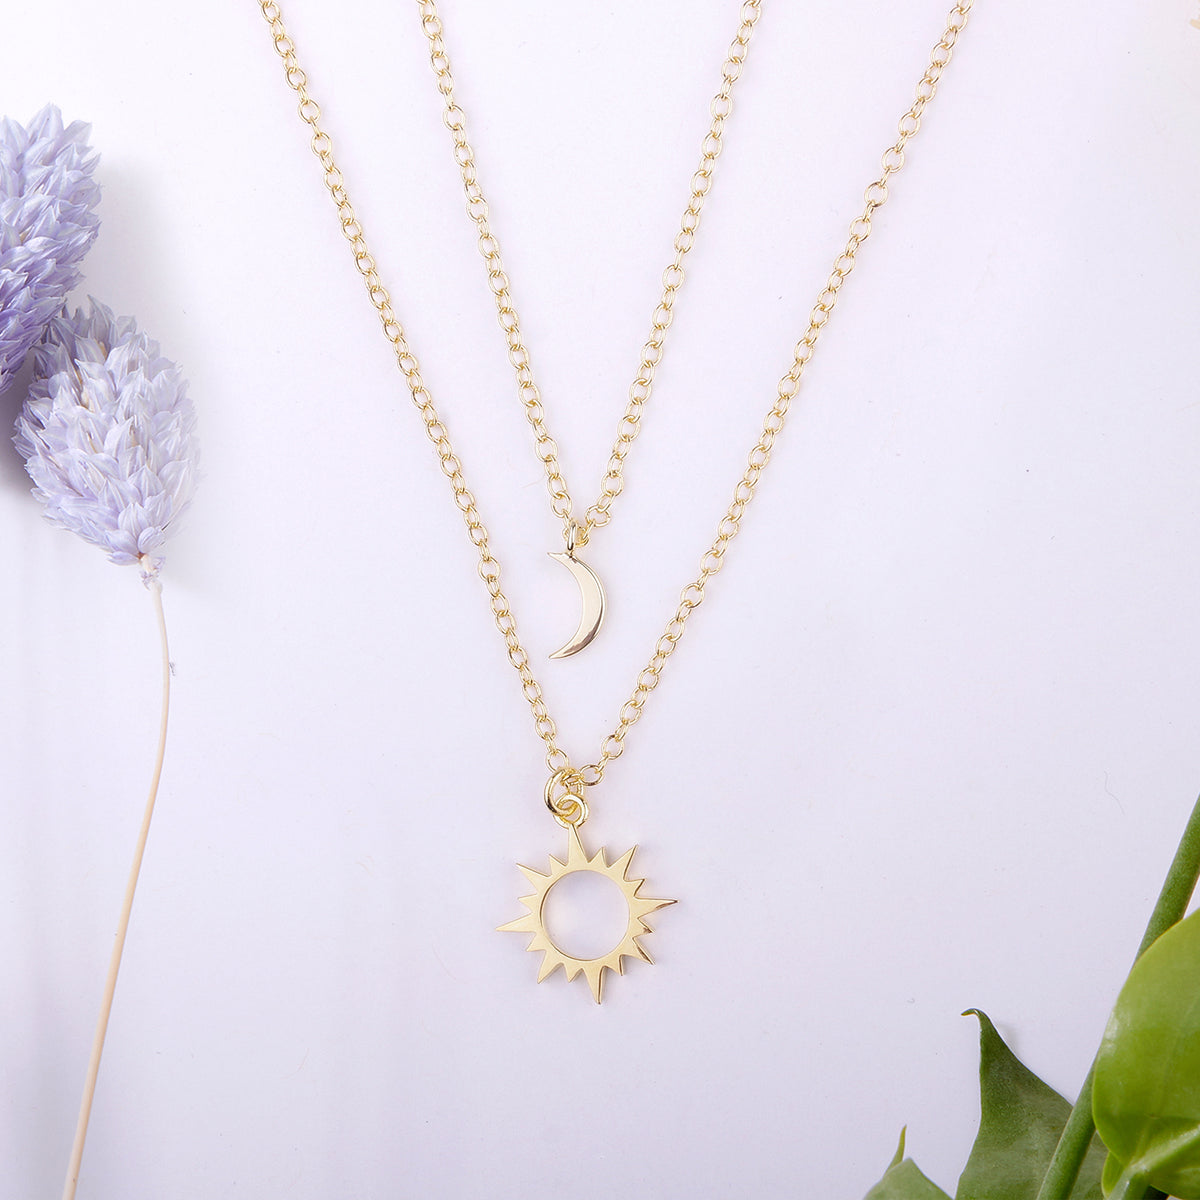 Unbiological Sisters Sun and Moon Pendants Necklace Set